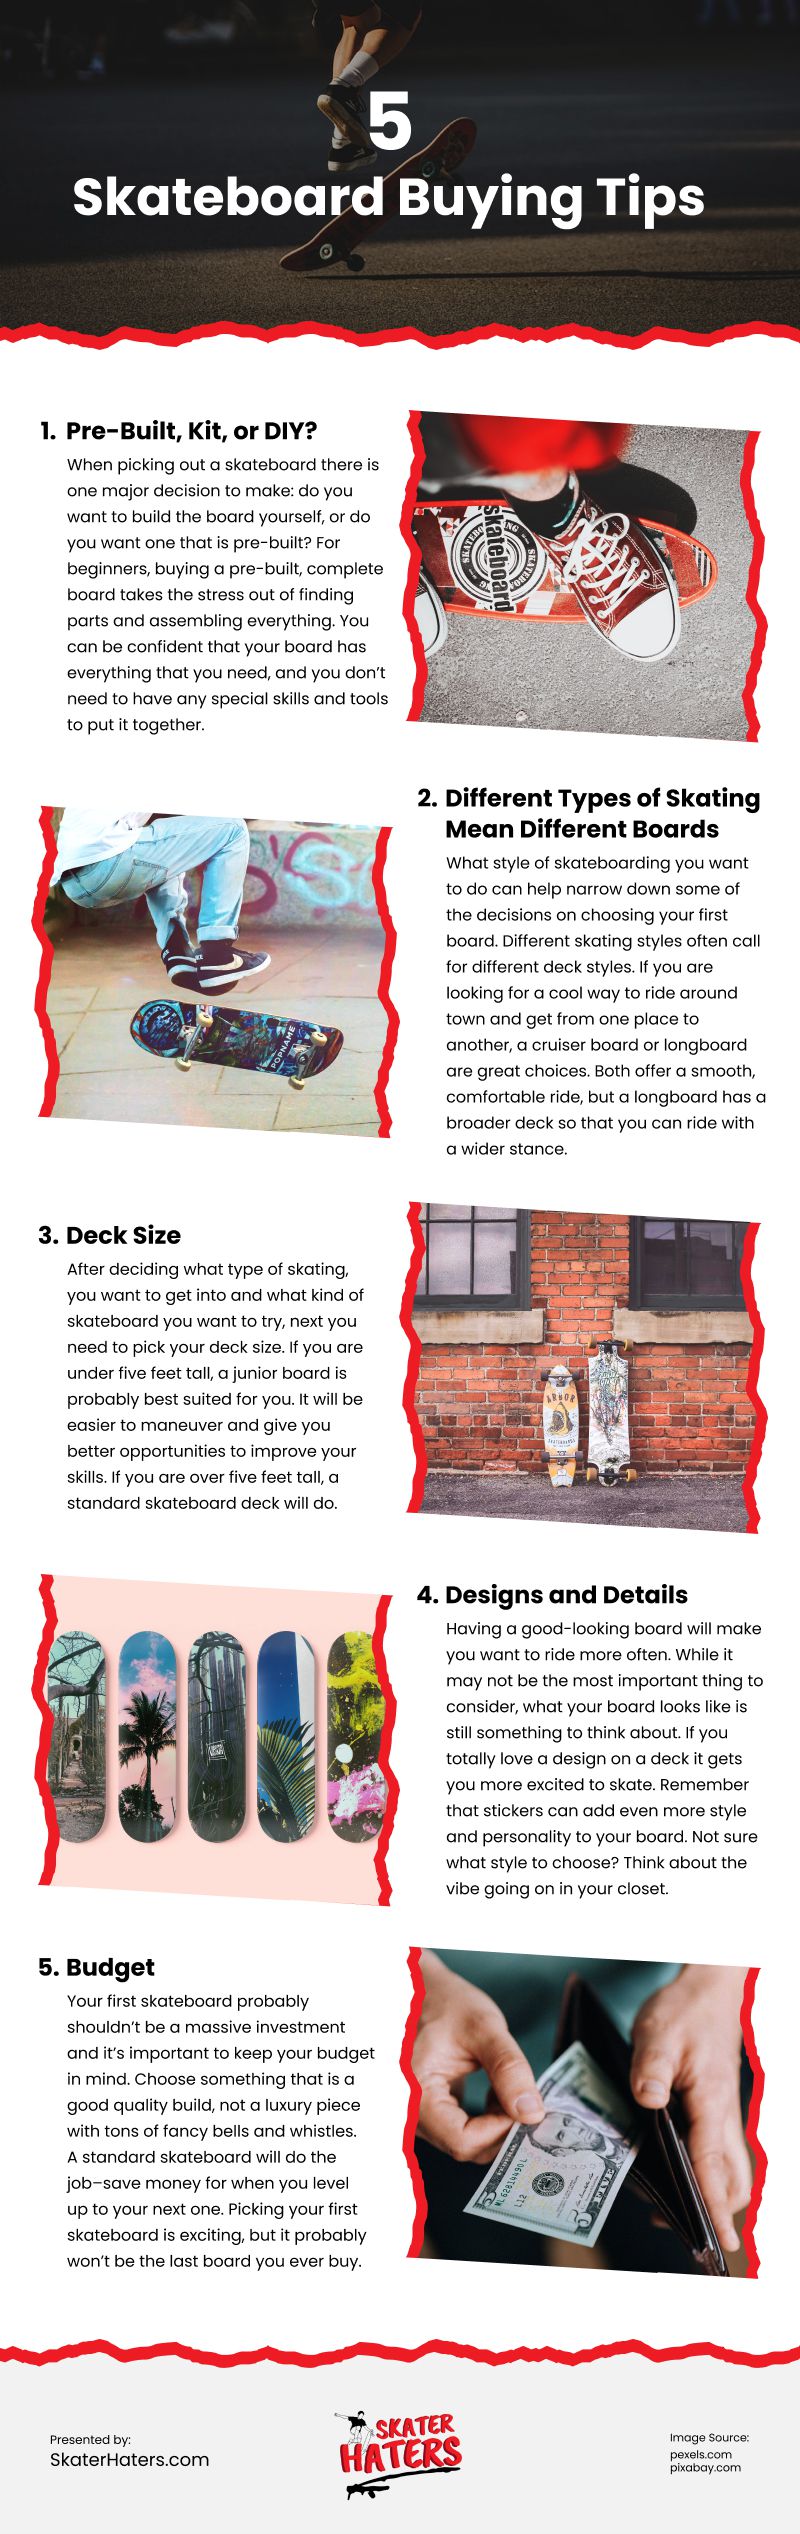 5 Skateboard Buying Tips Infographic